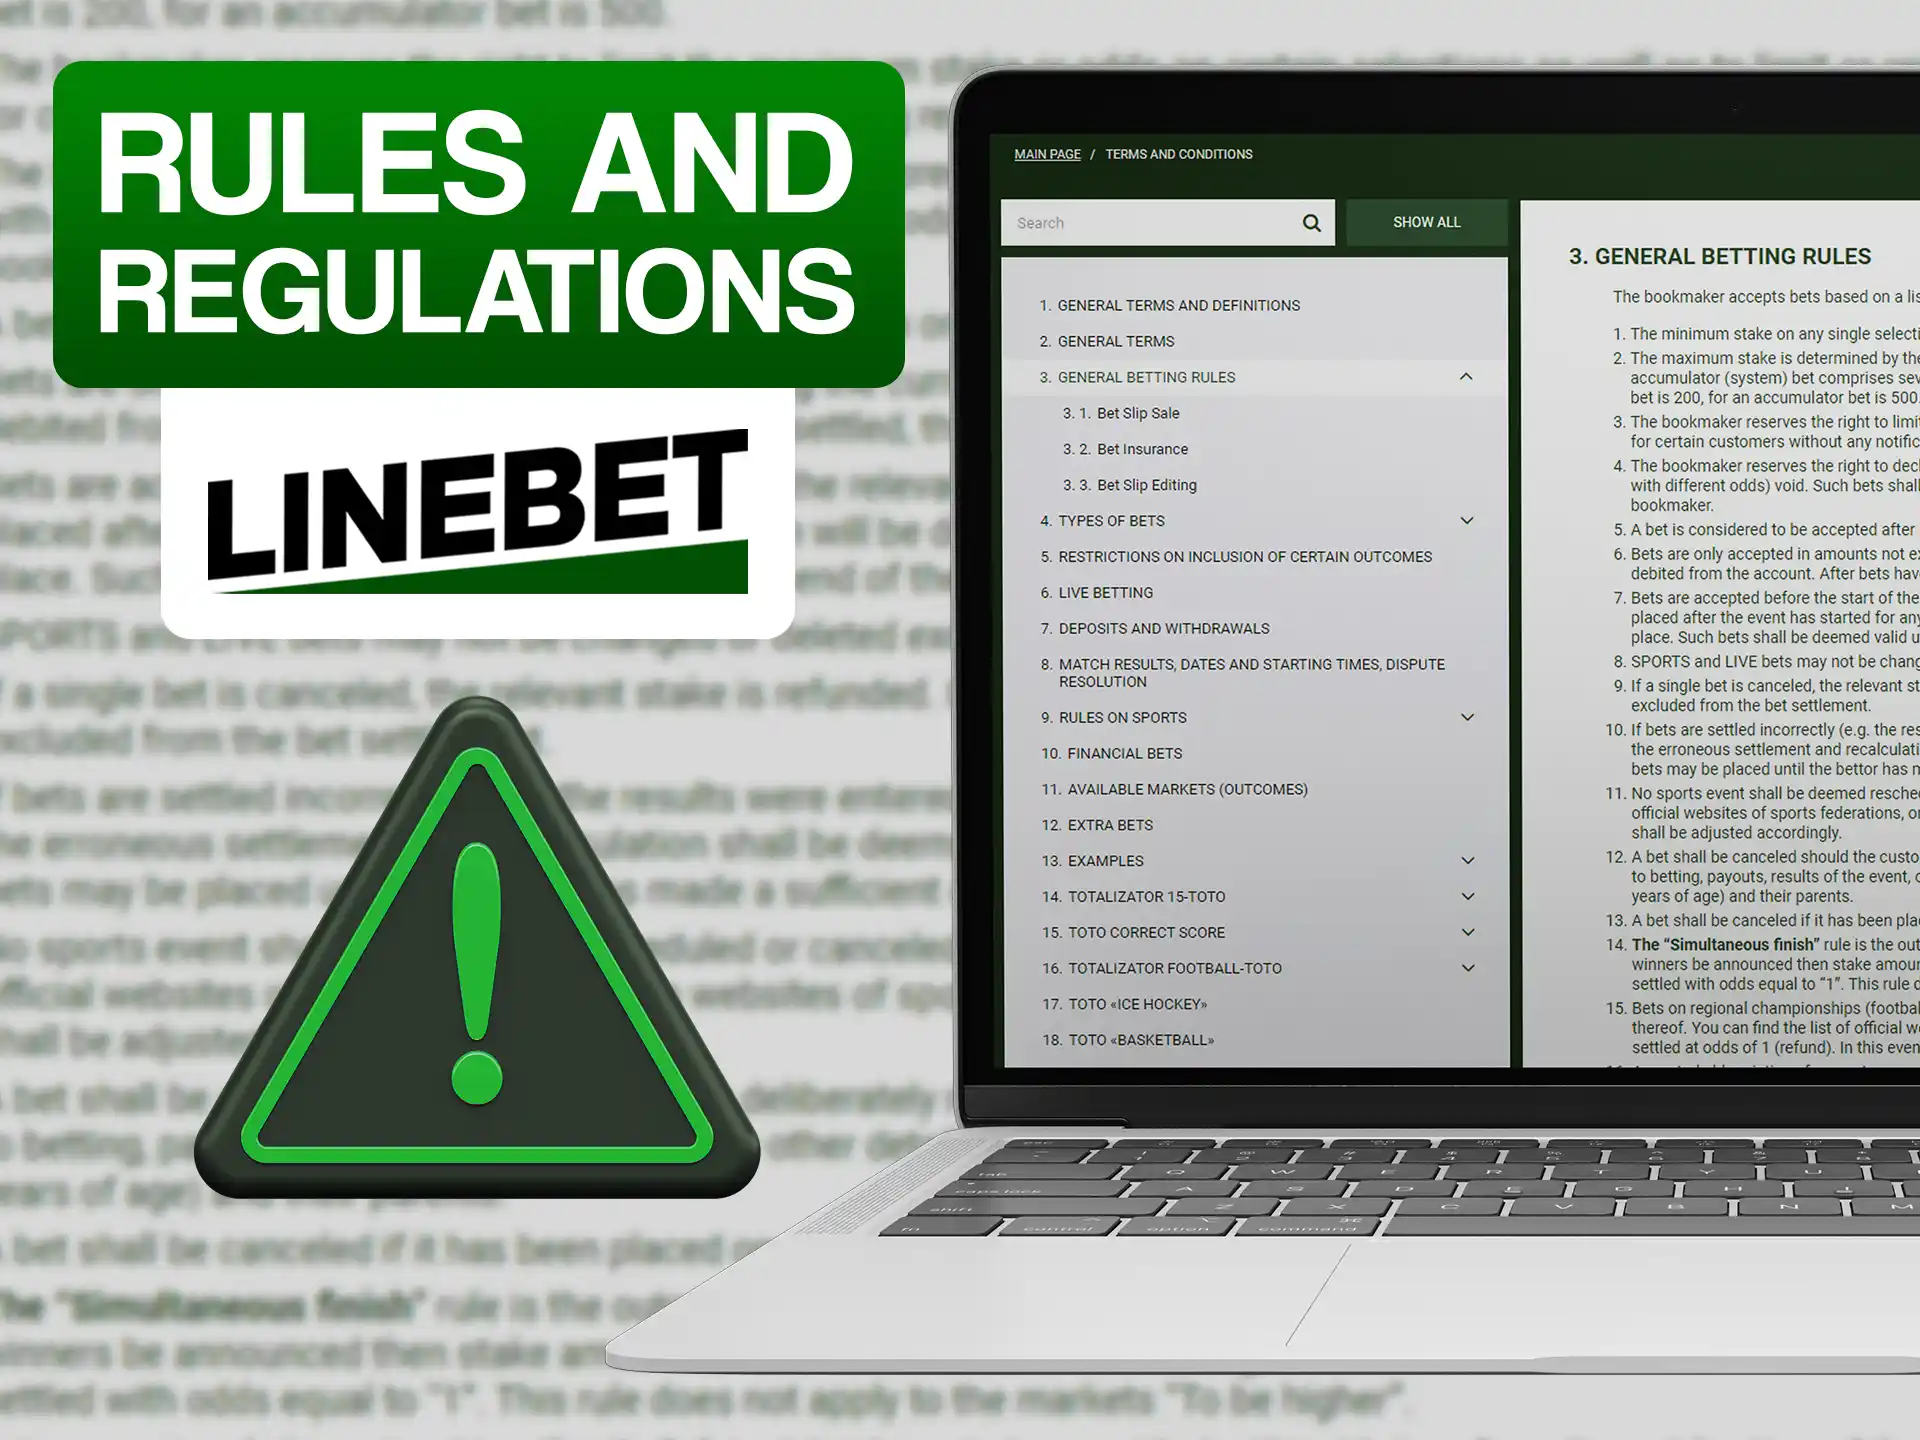 Follow Linebet's rules for best betting experience.